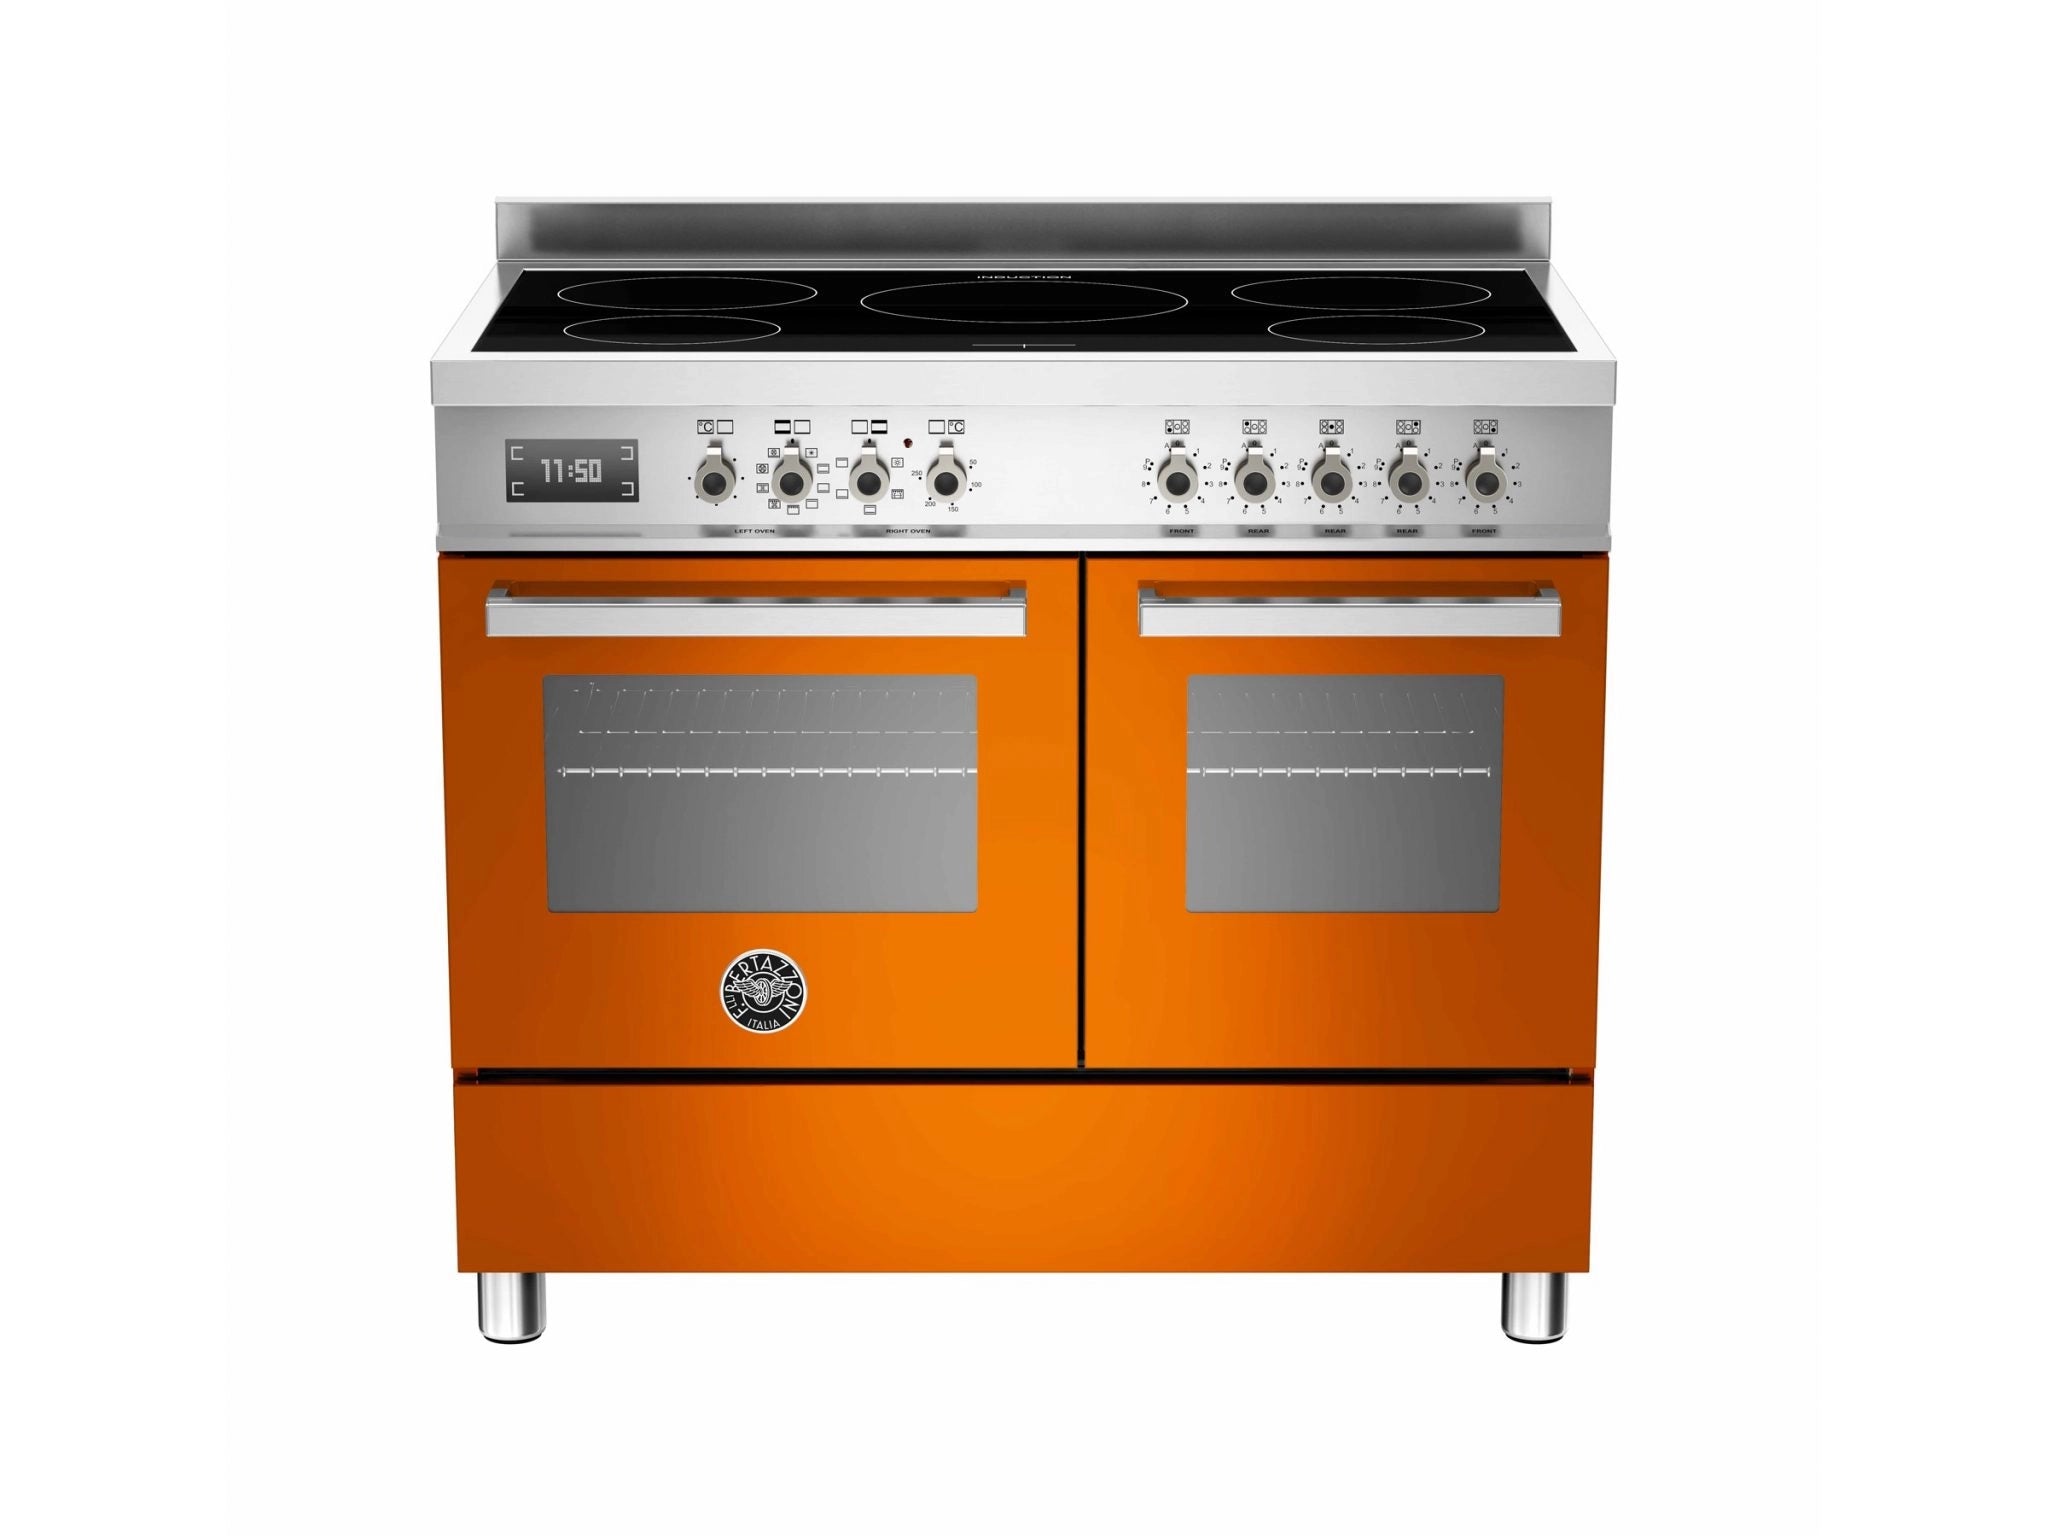 Bertazzoni Pro1005imfedart Professional 100cm Range Cooker Twin Oven Induction Gloss Orange Exclusive Clearance Offer